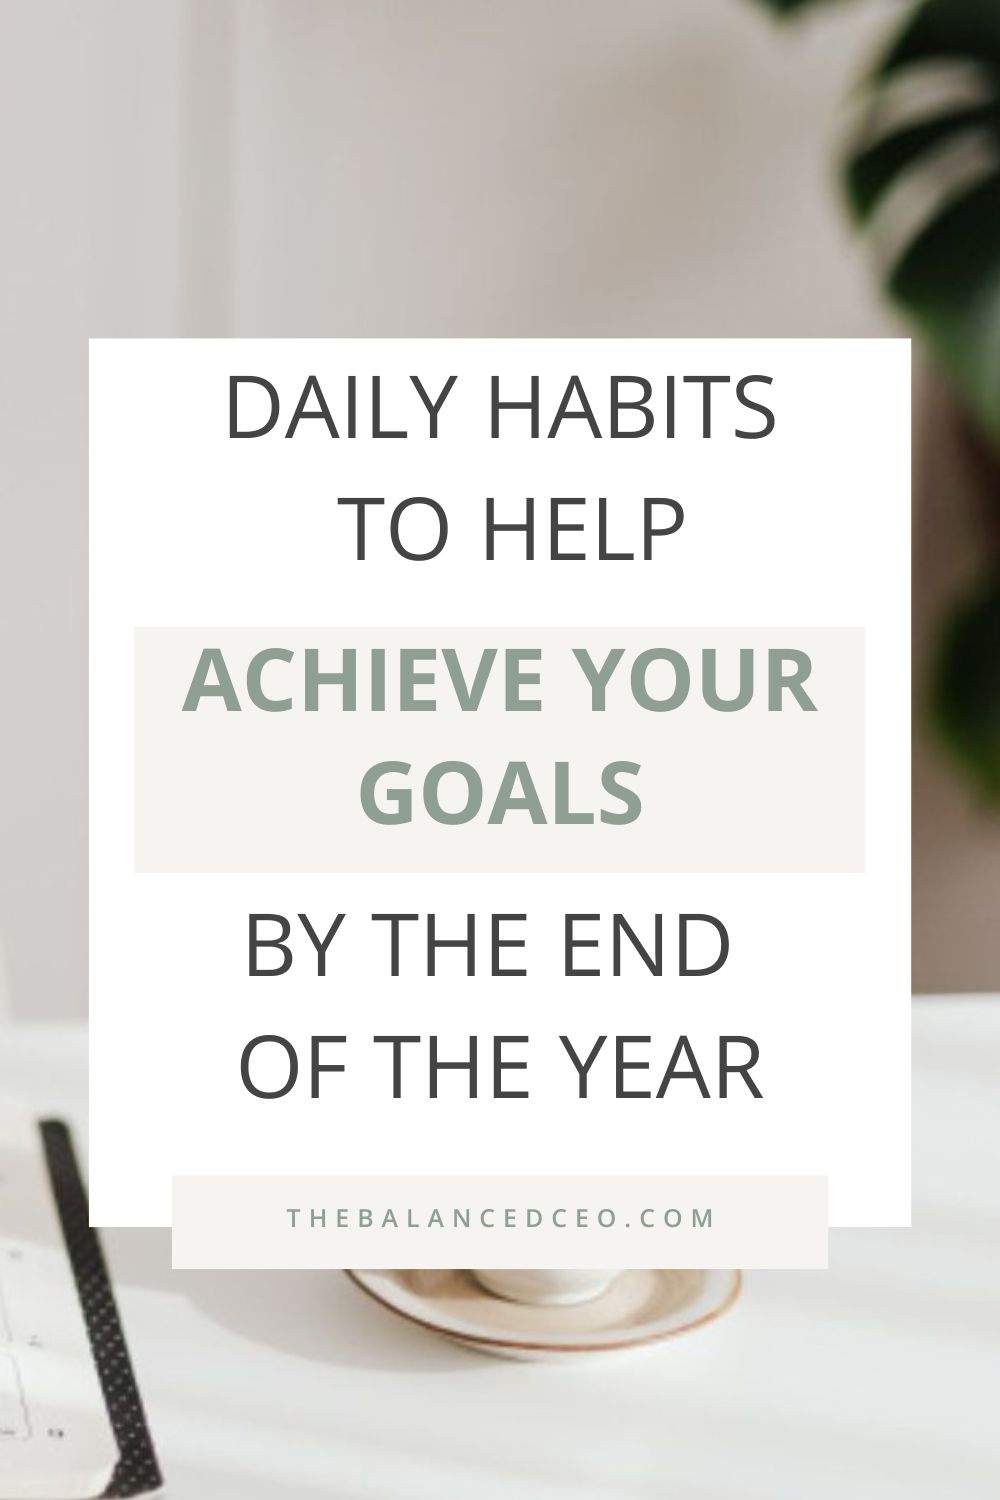 Daily Habits to Help Achieve Your Goals by the End of the Year